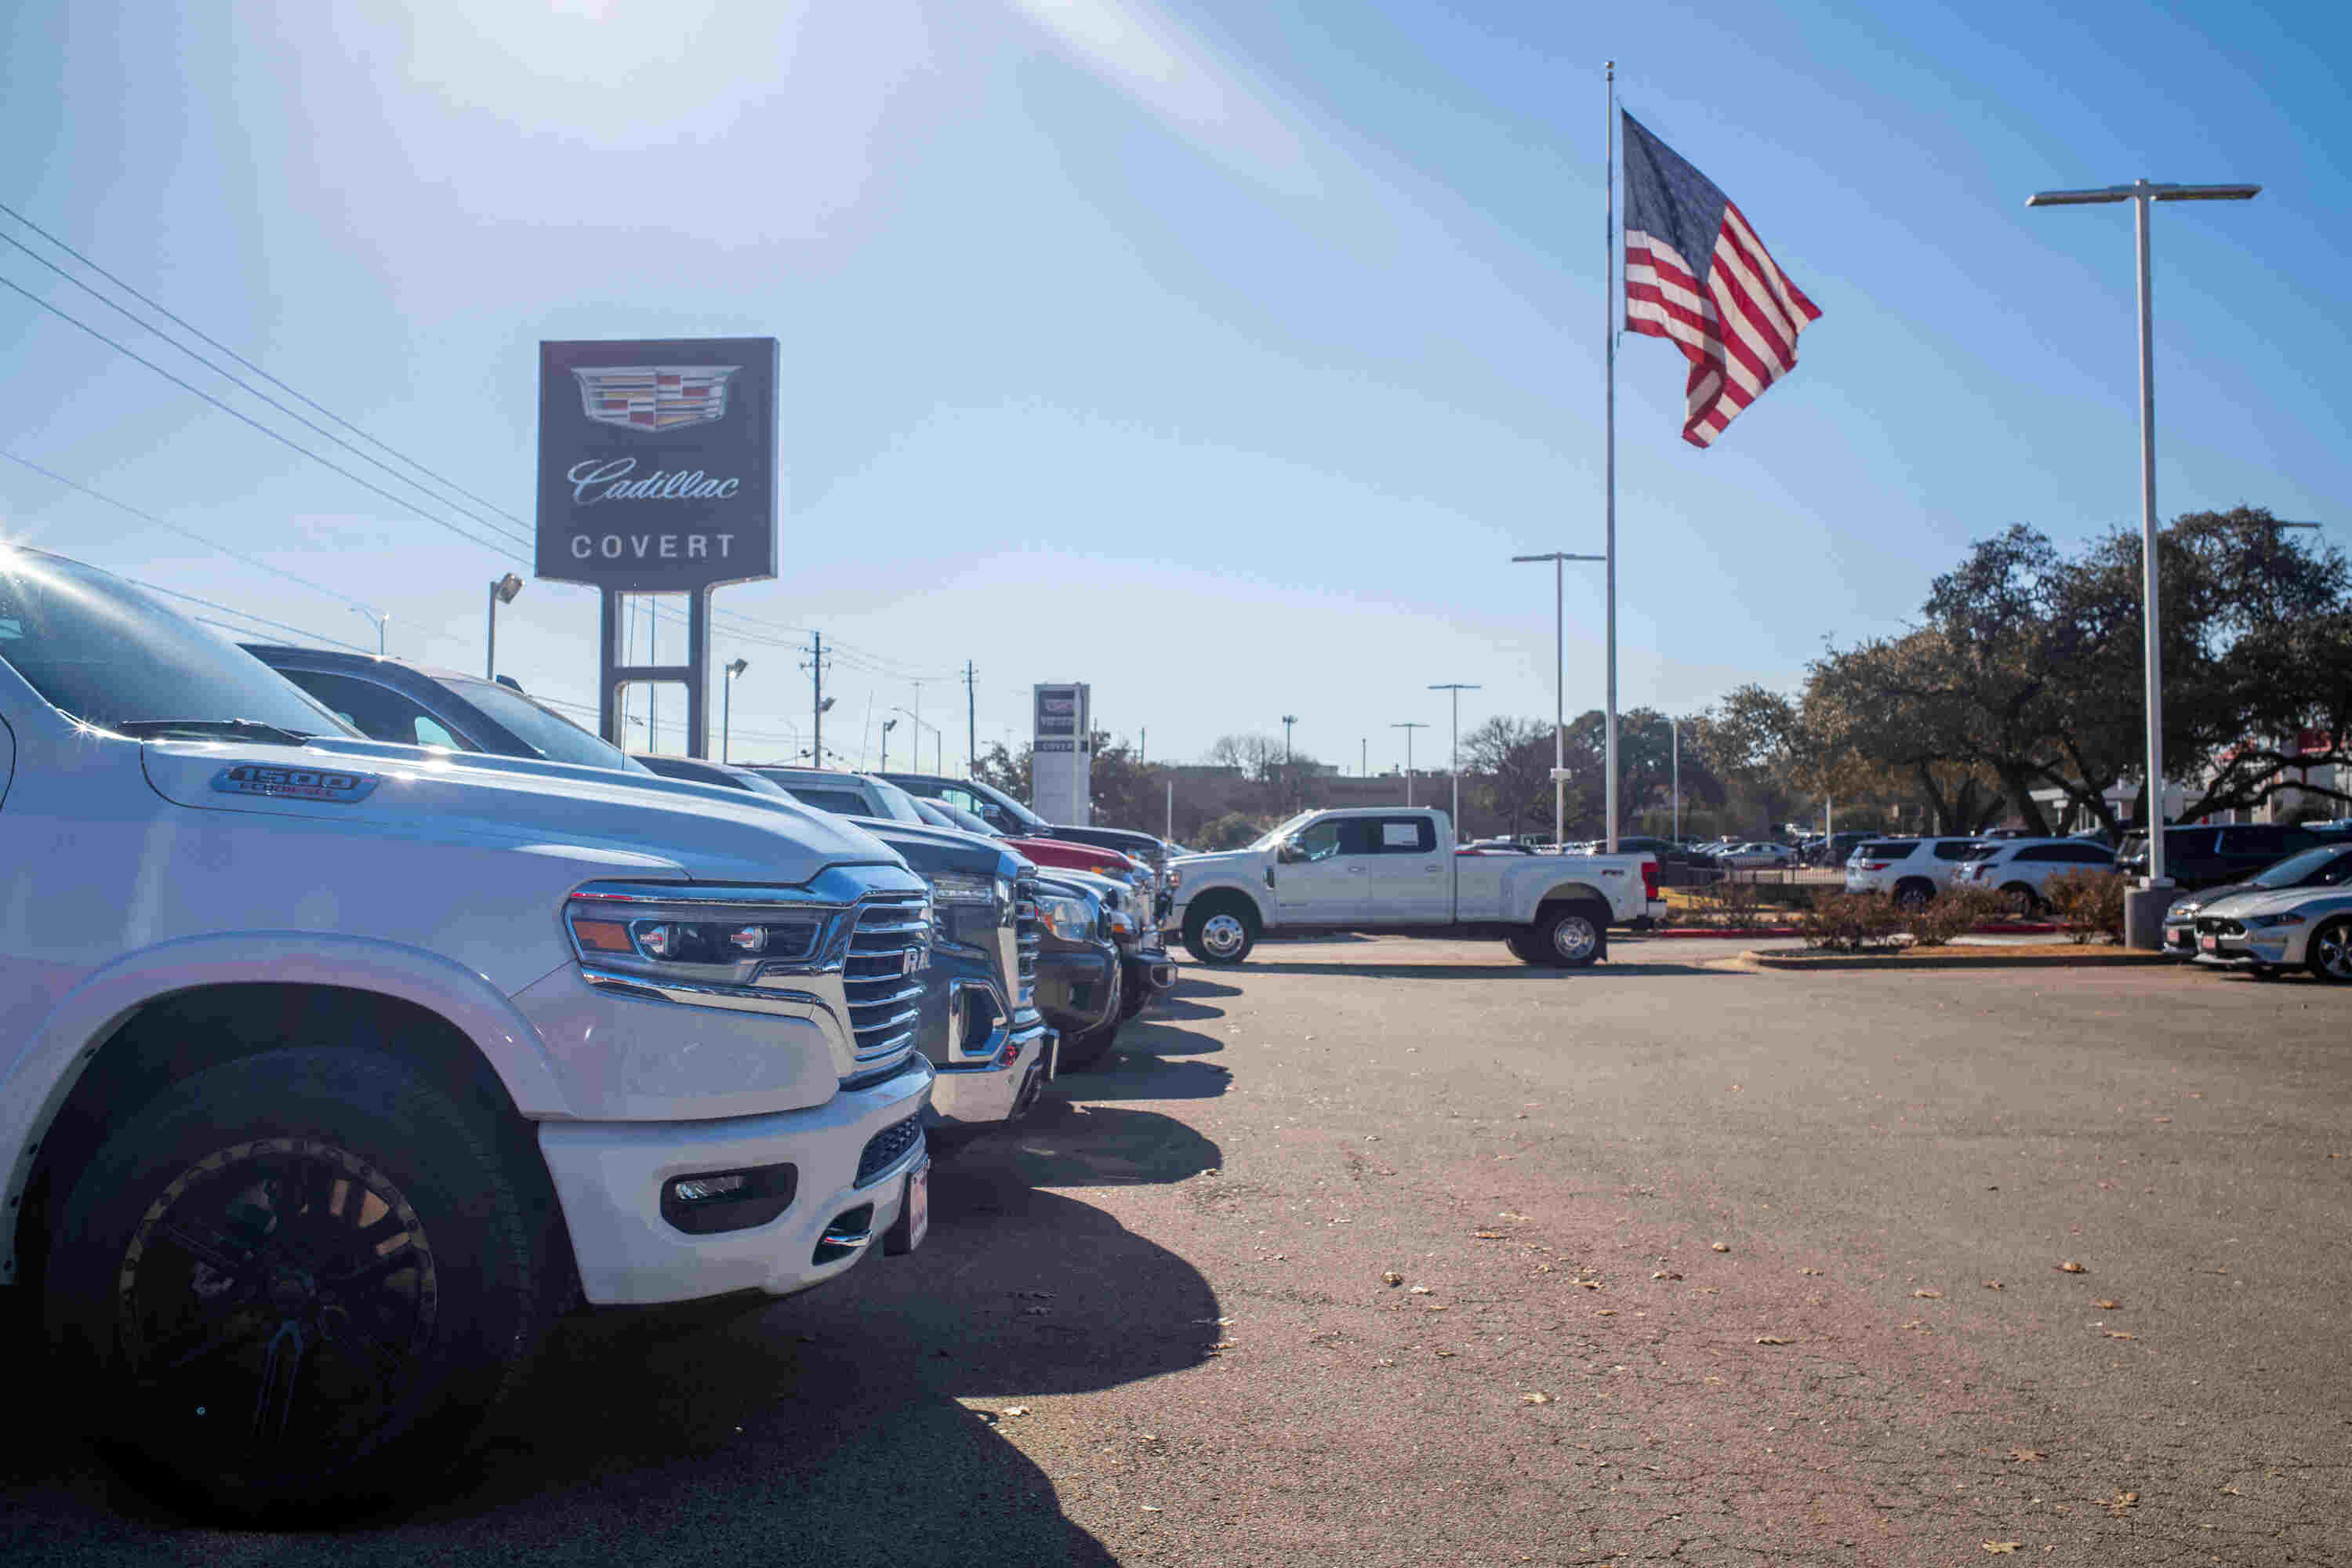 A dealership with multiple pickup trucks for sale.